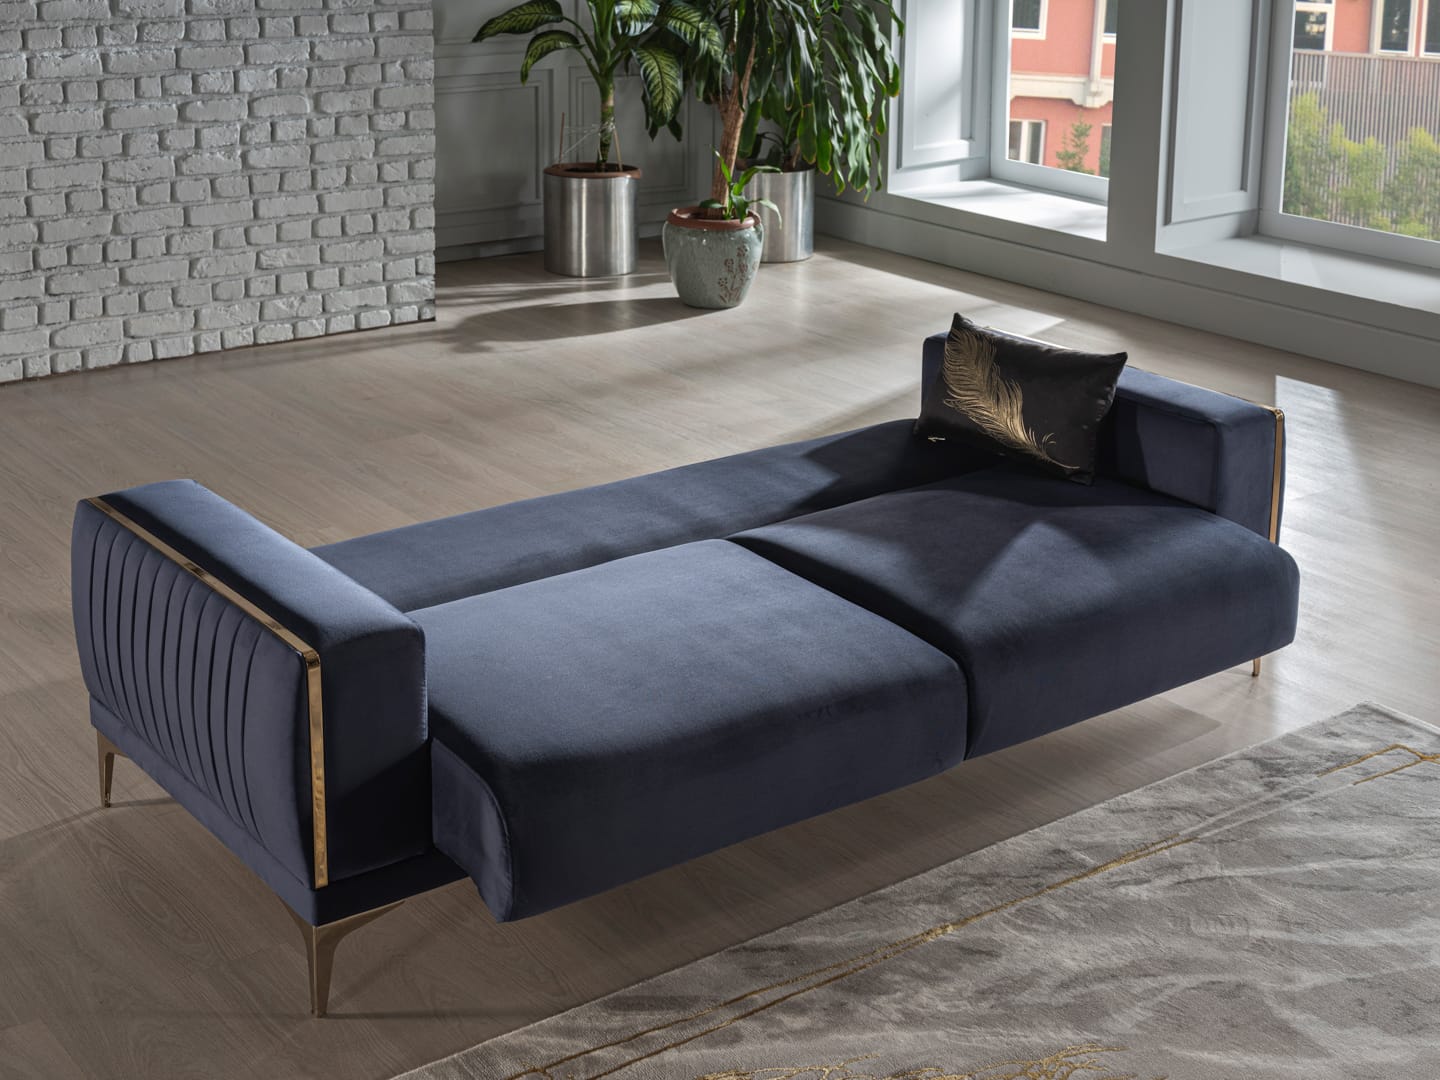 Carlino 3 Seat Sleeper Sofa Bed Napoly Navy Blue by Bellona